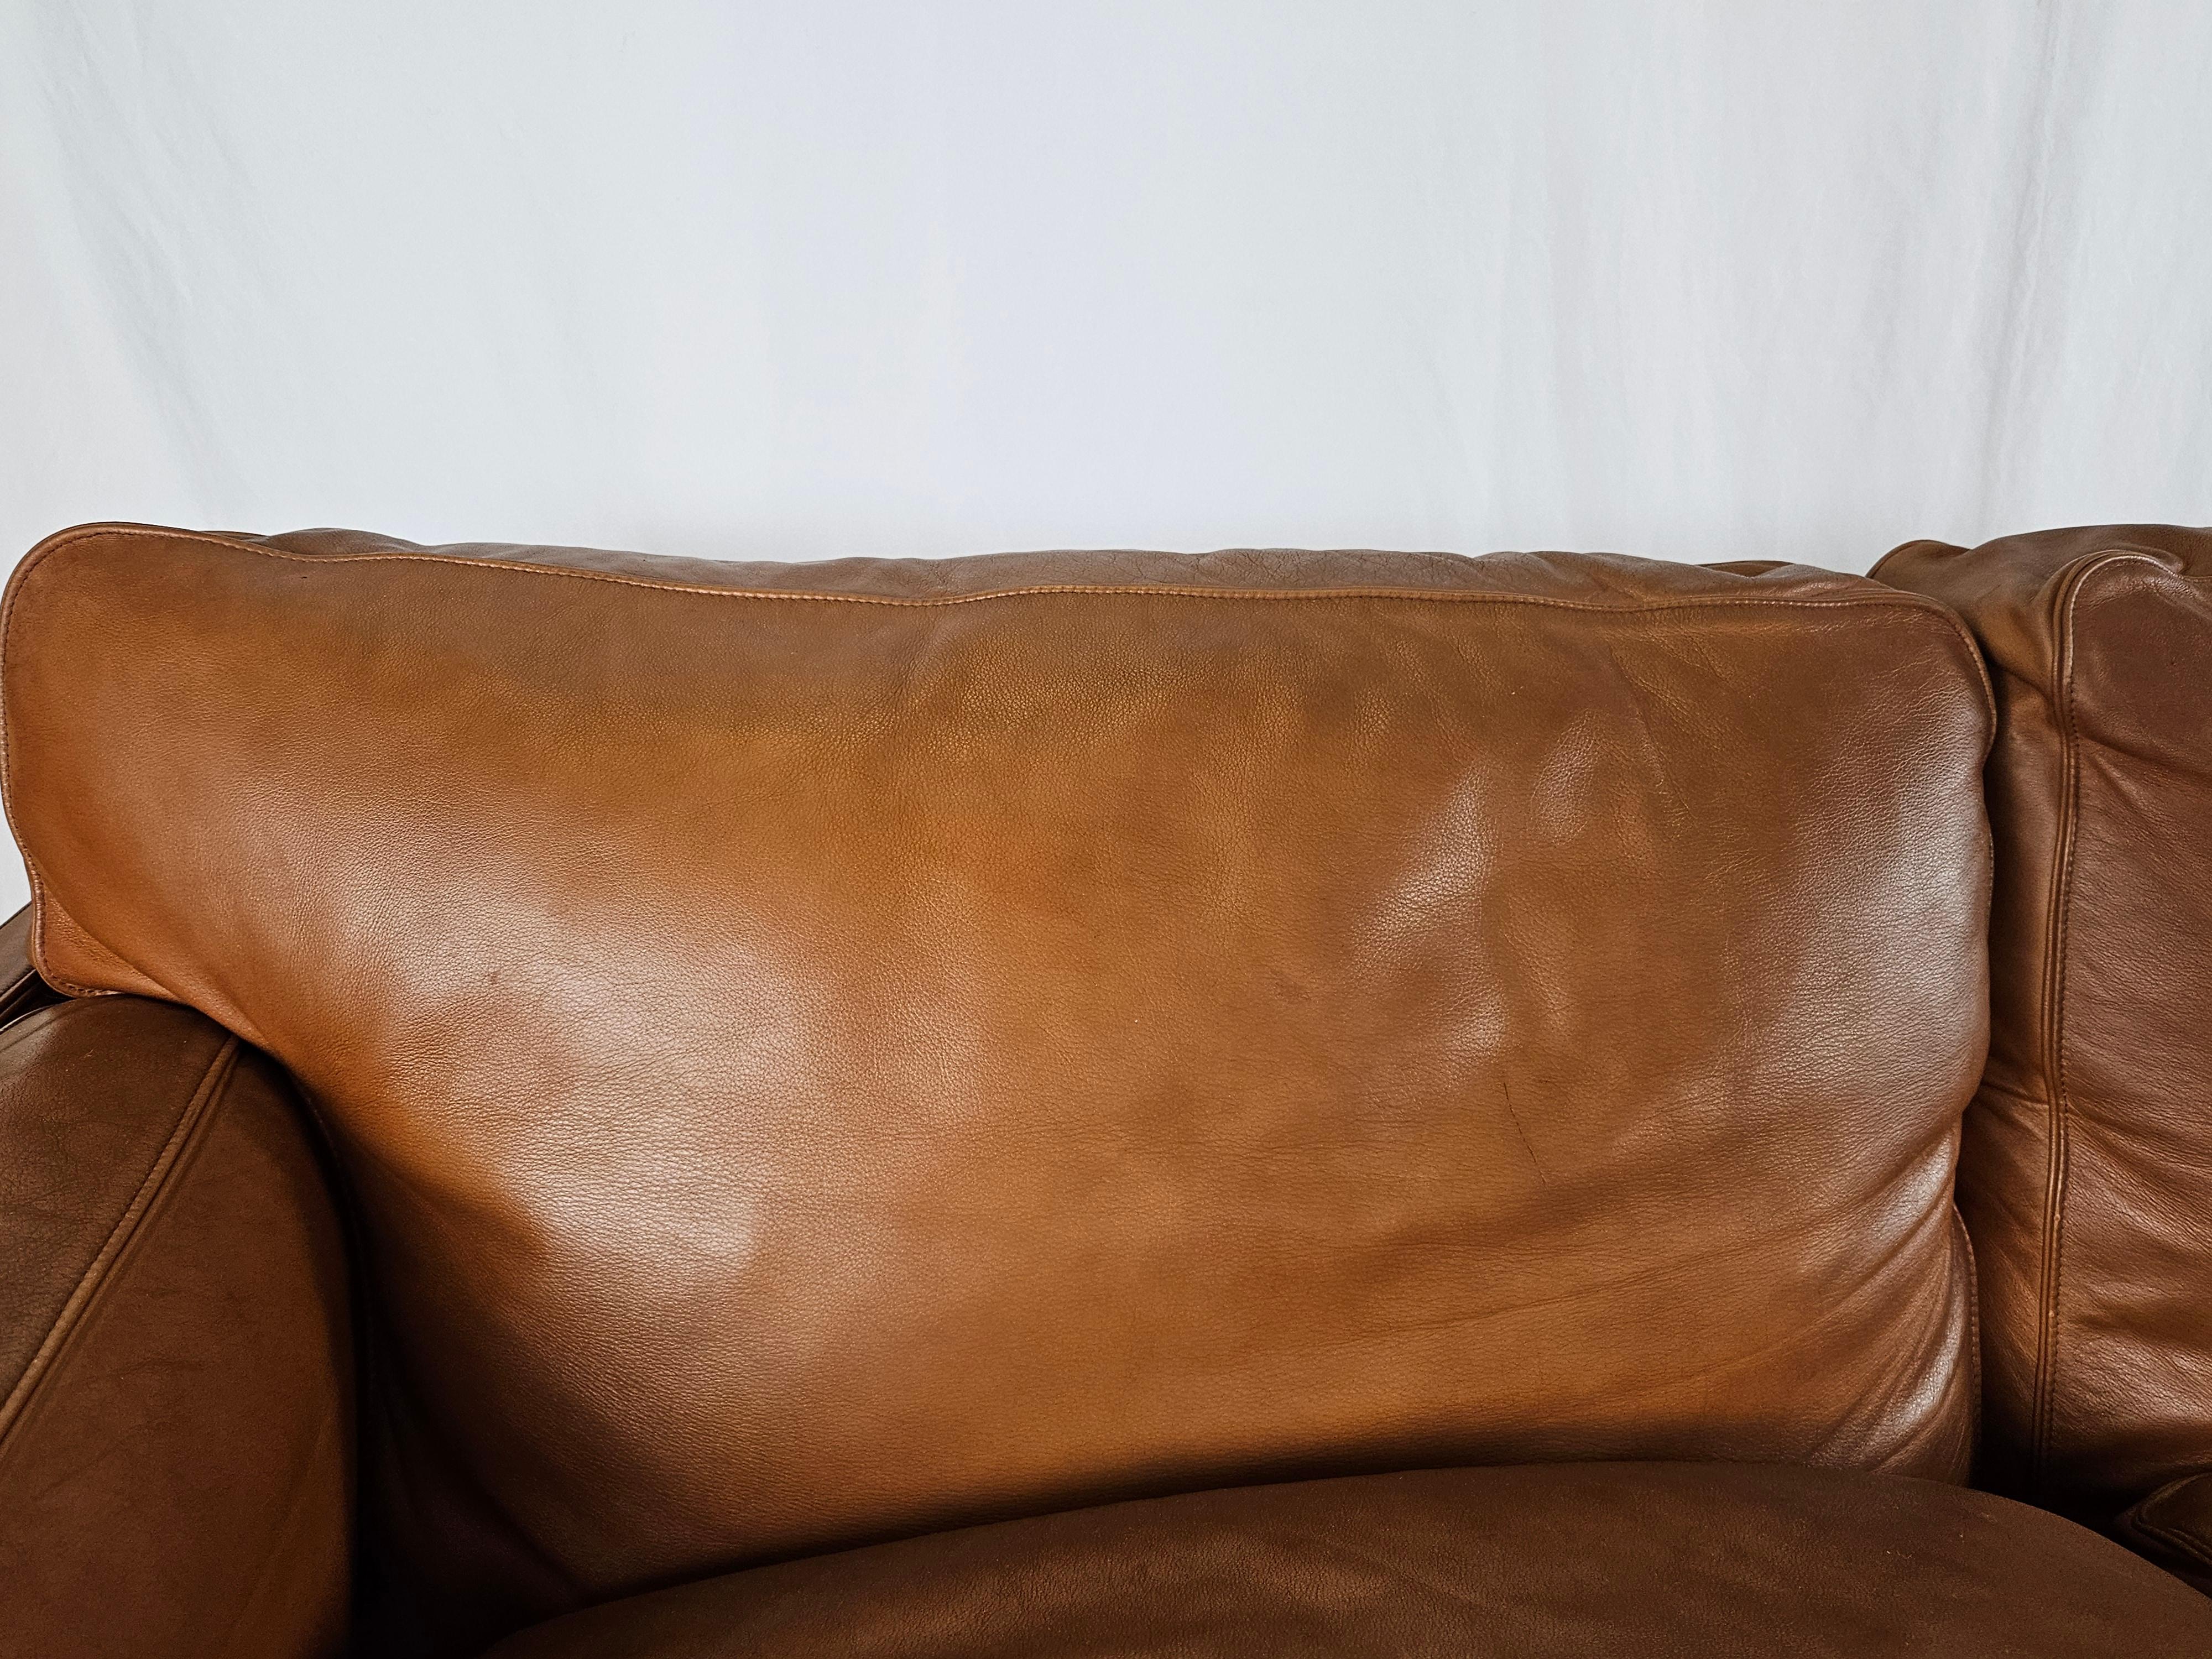 Poltrona Frau three-seater 1970s sofa in cognac-colored leather In Good Condition For Sale In Premariacco, IT